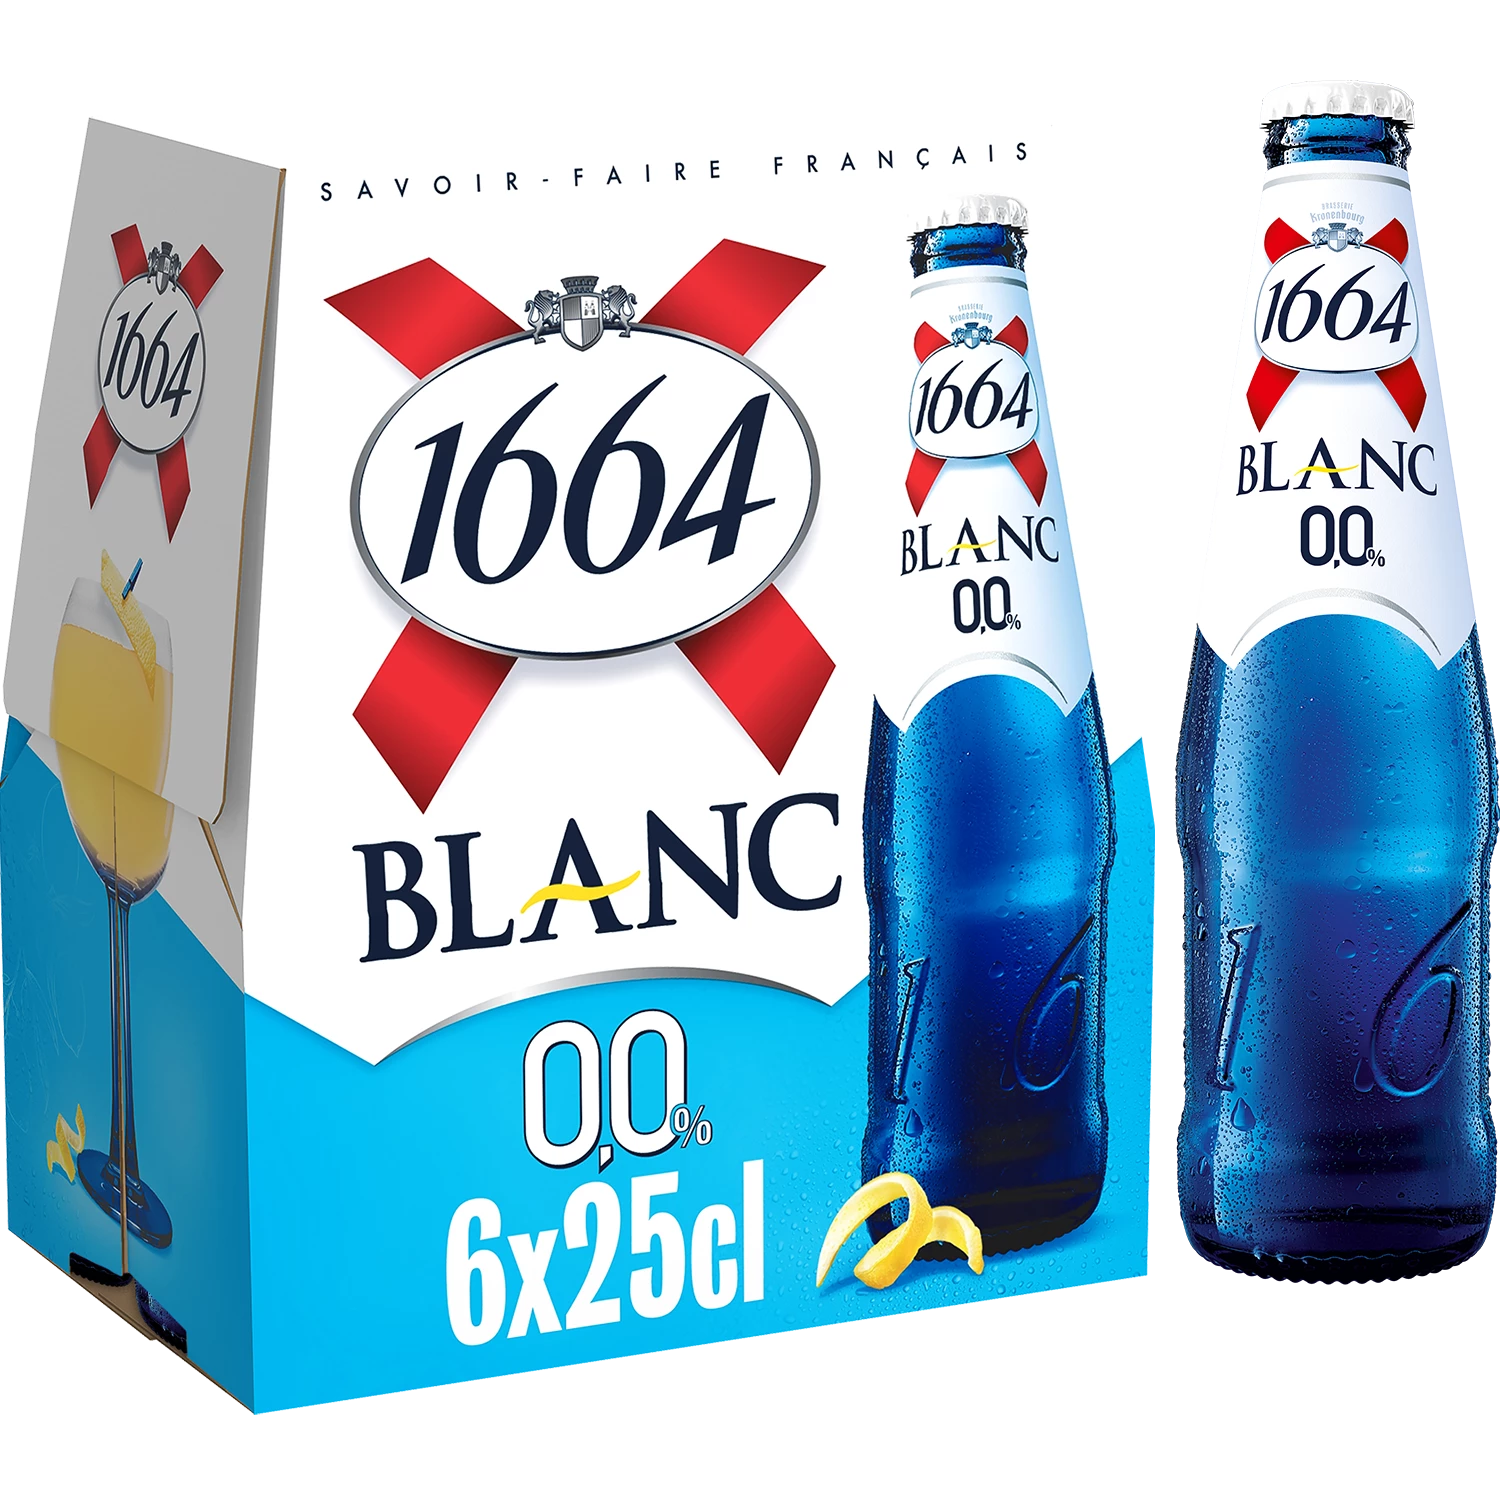 Alcohol-free white beer - 1664